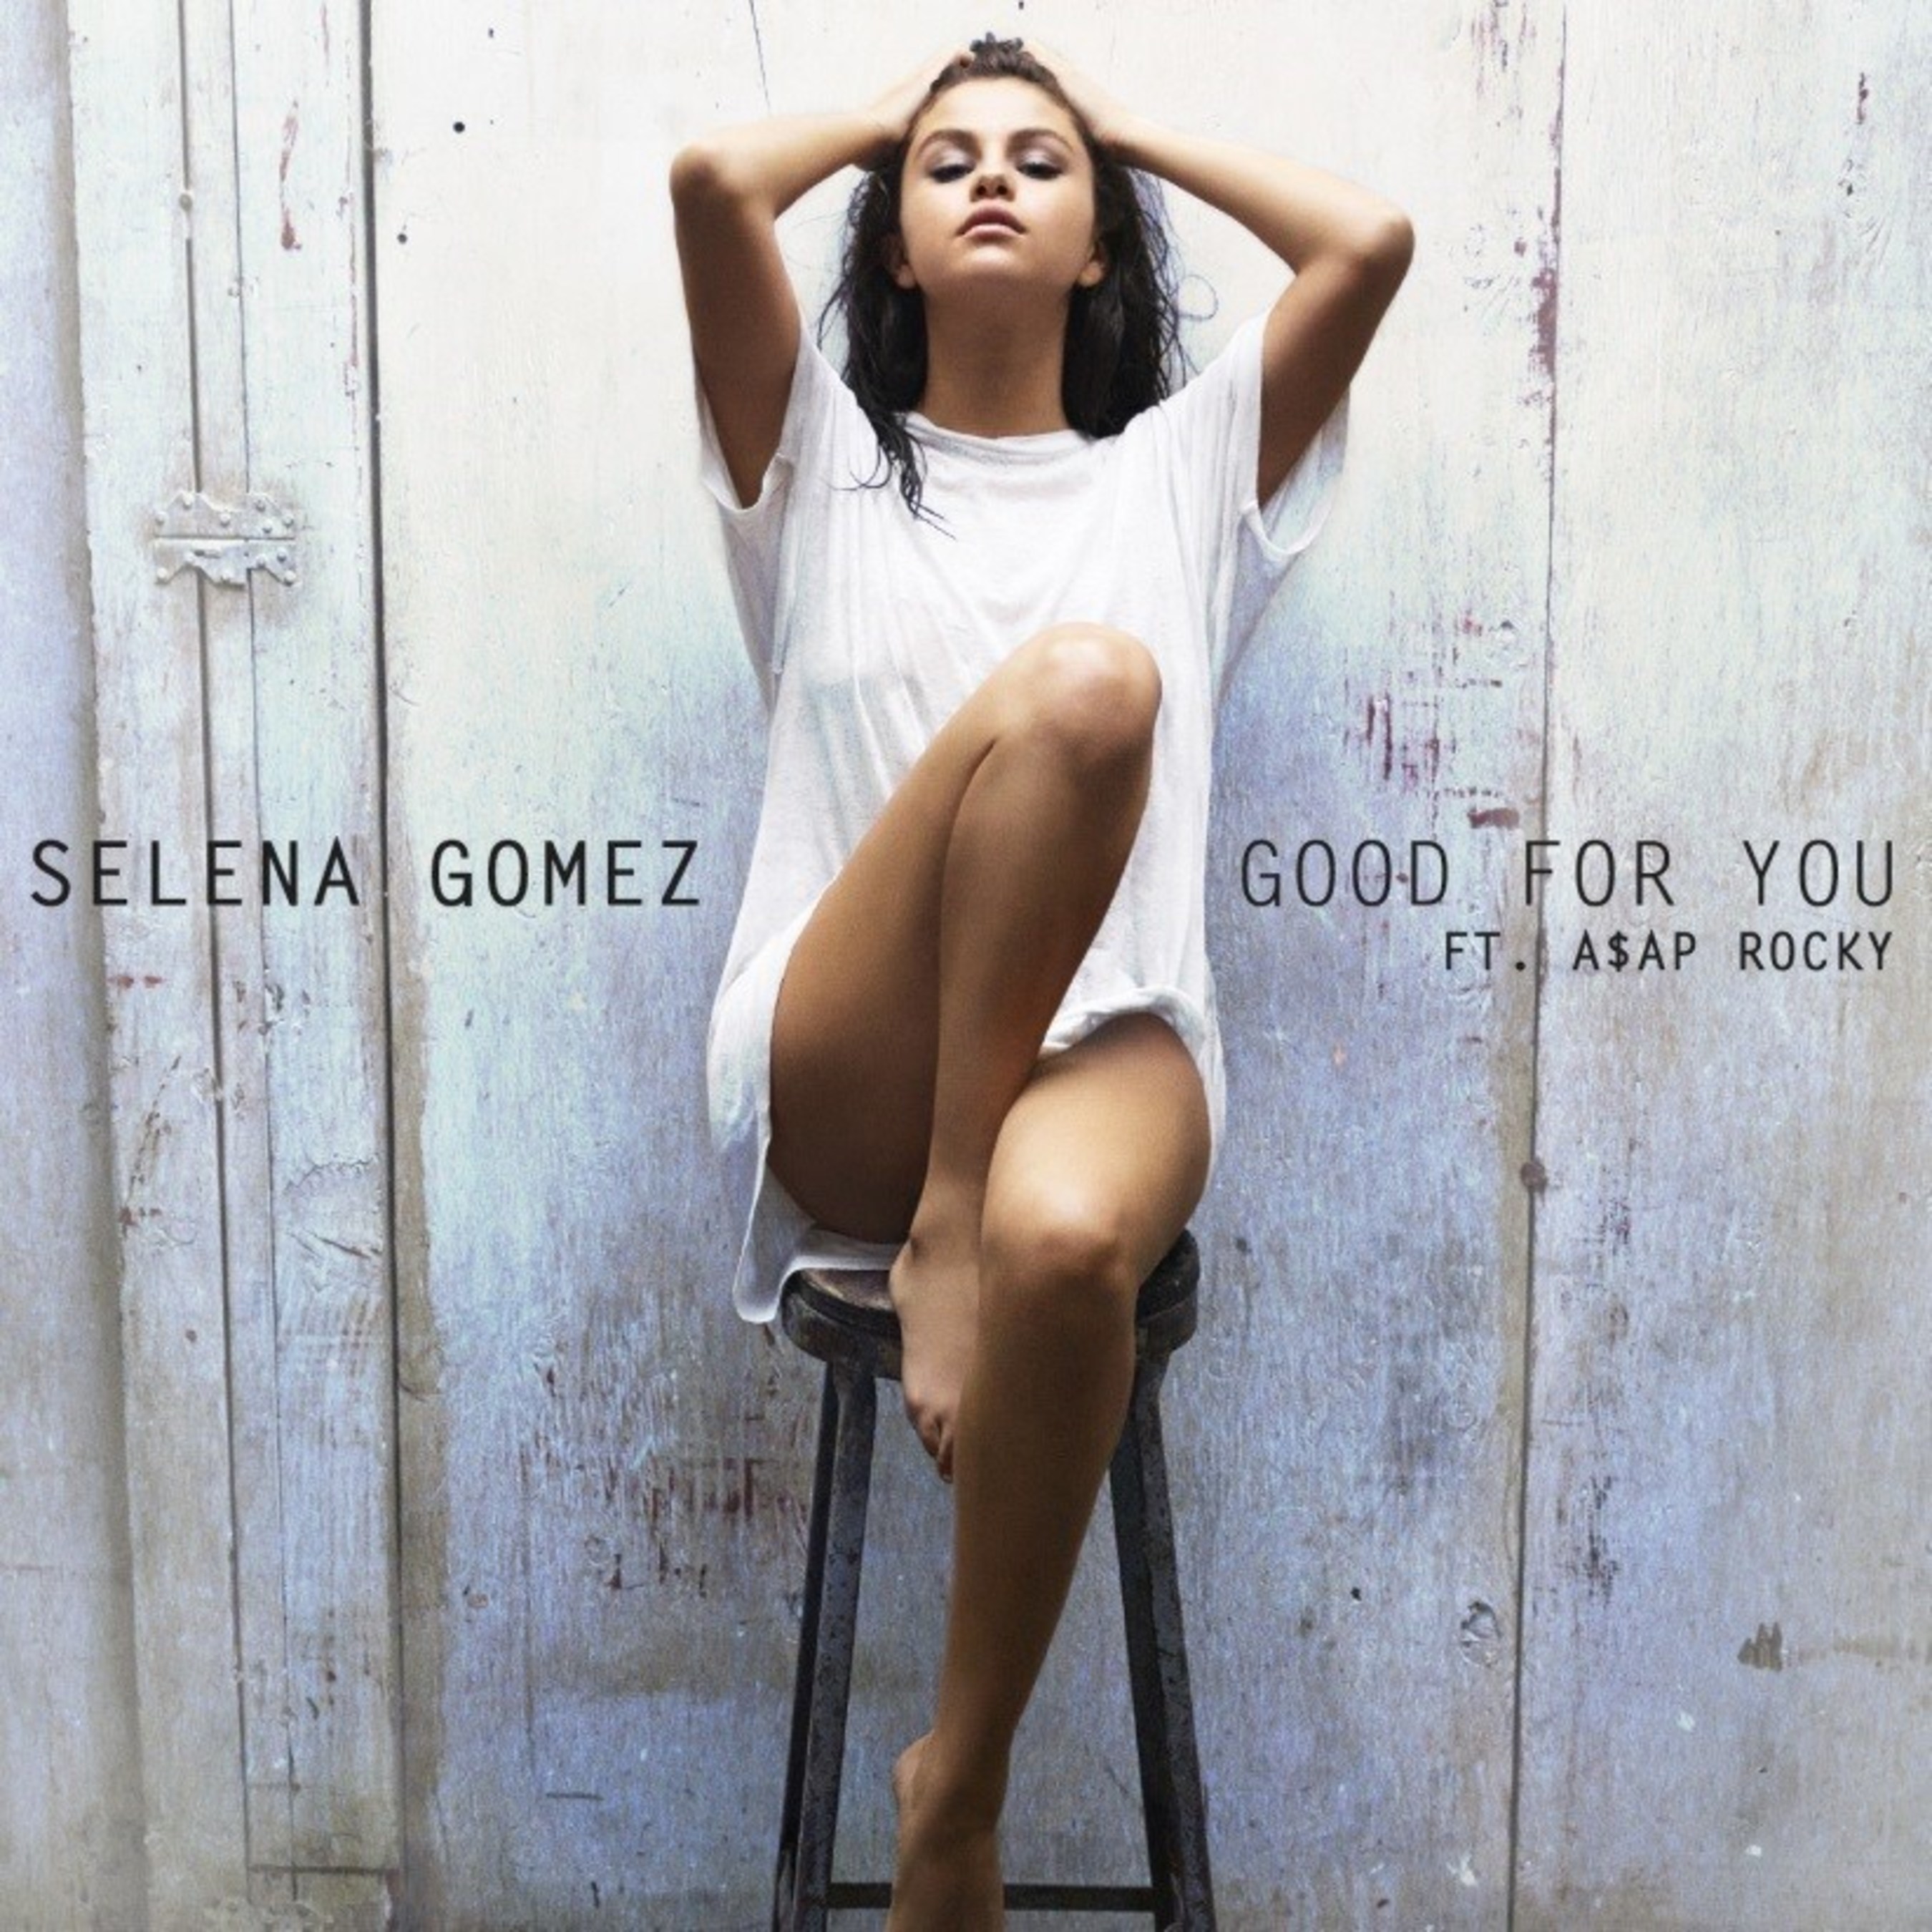 Selena Gomez's Brand-New Single, "Good For You," Featuring A$AP Rocky, Available Now From All Digital Retailers